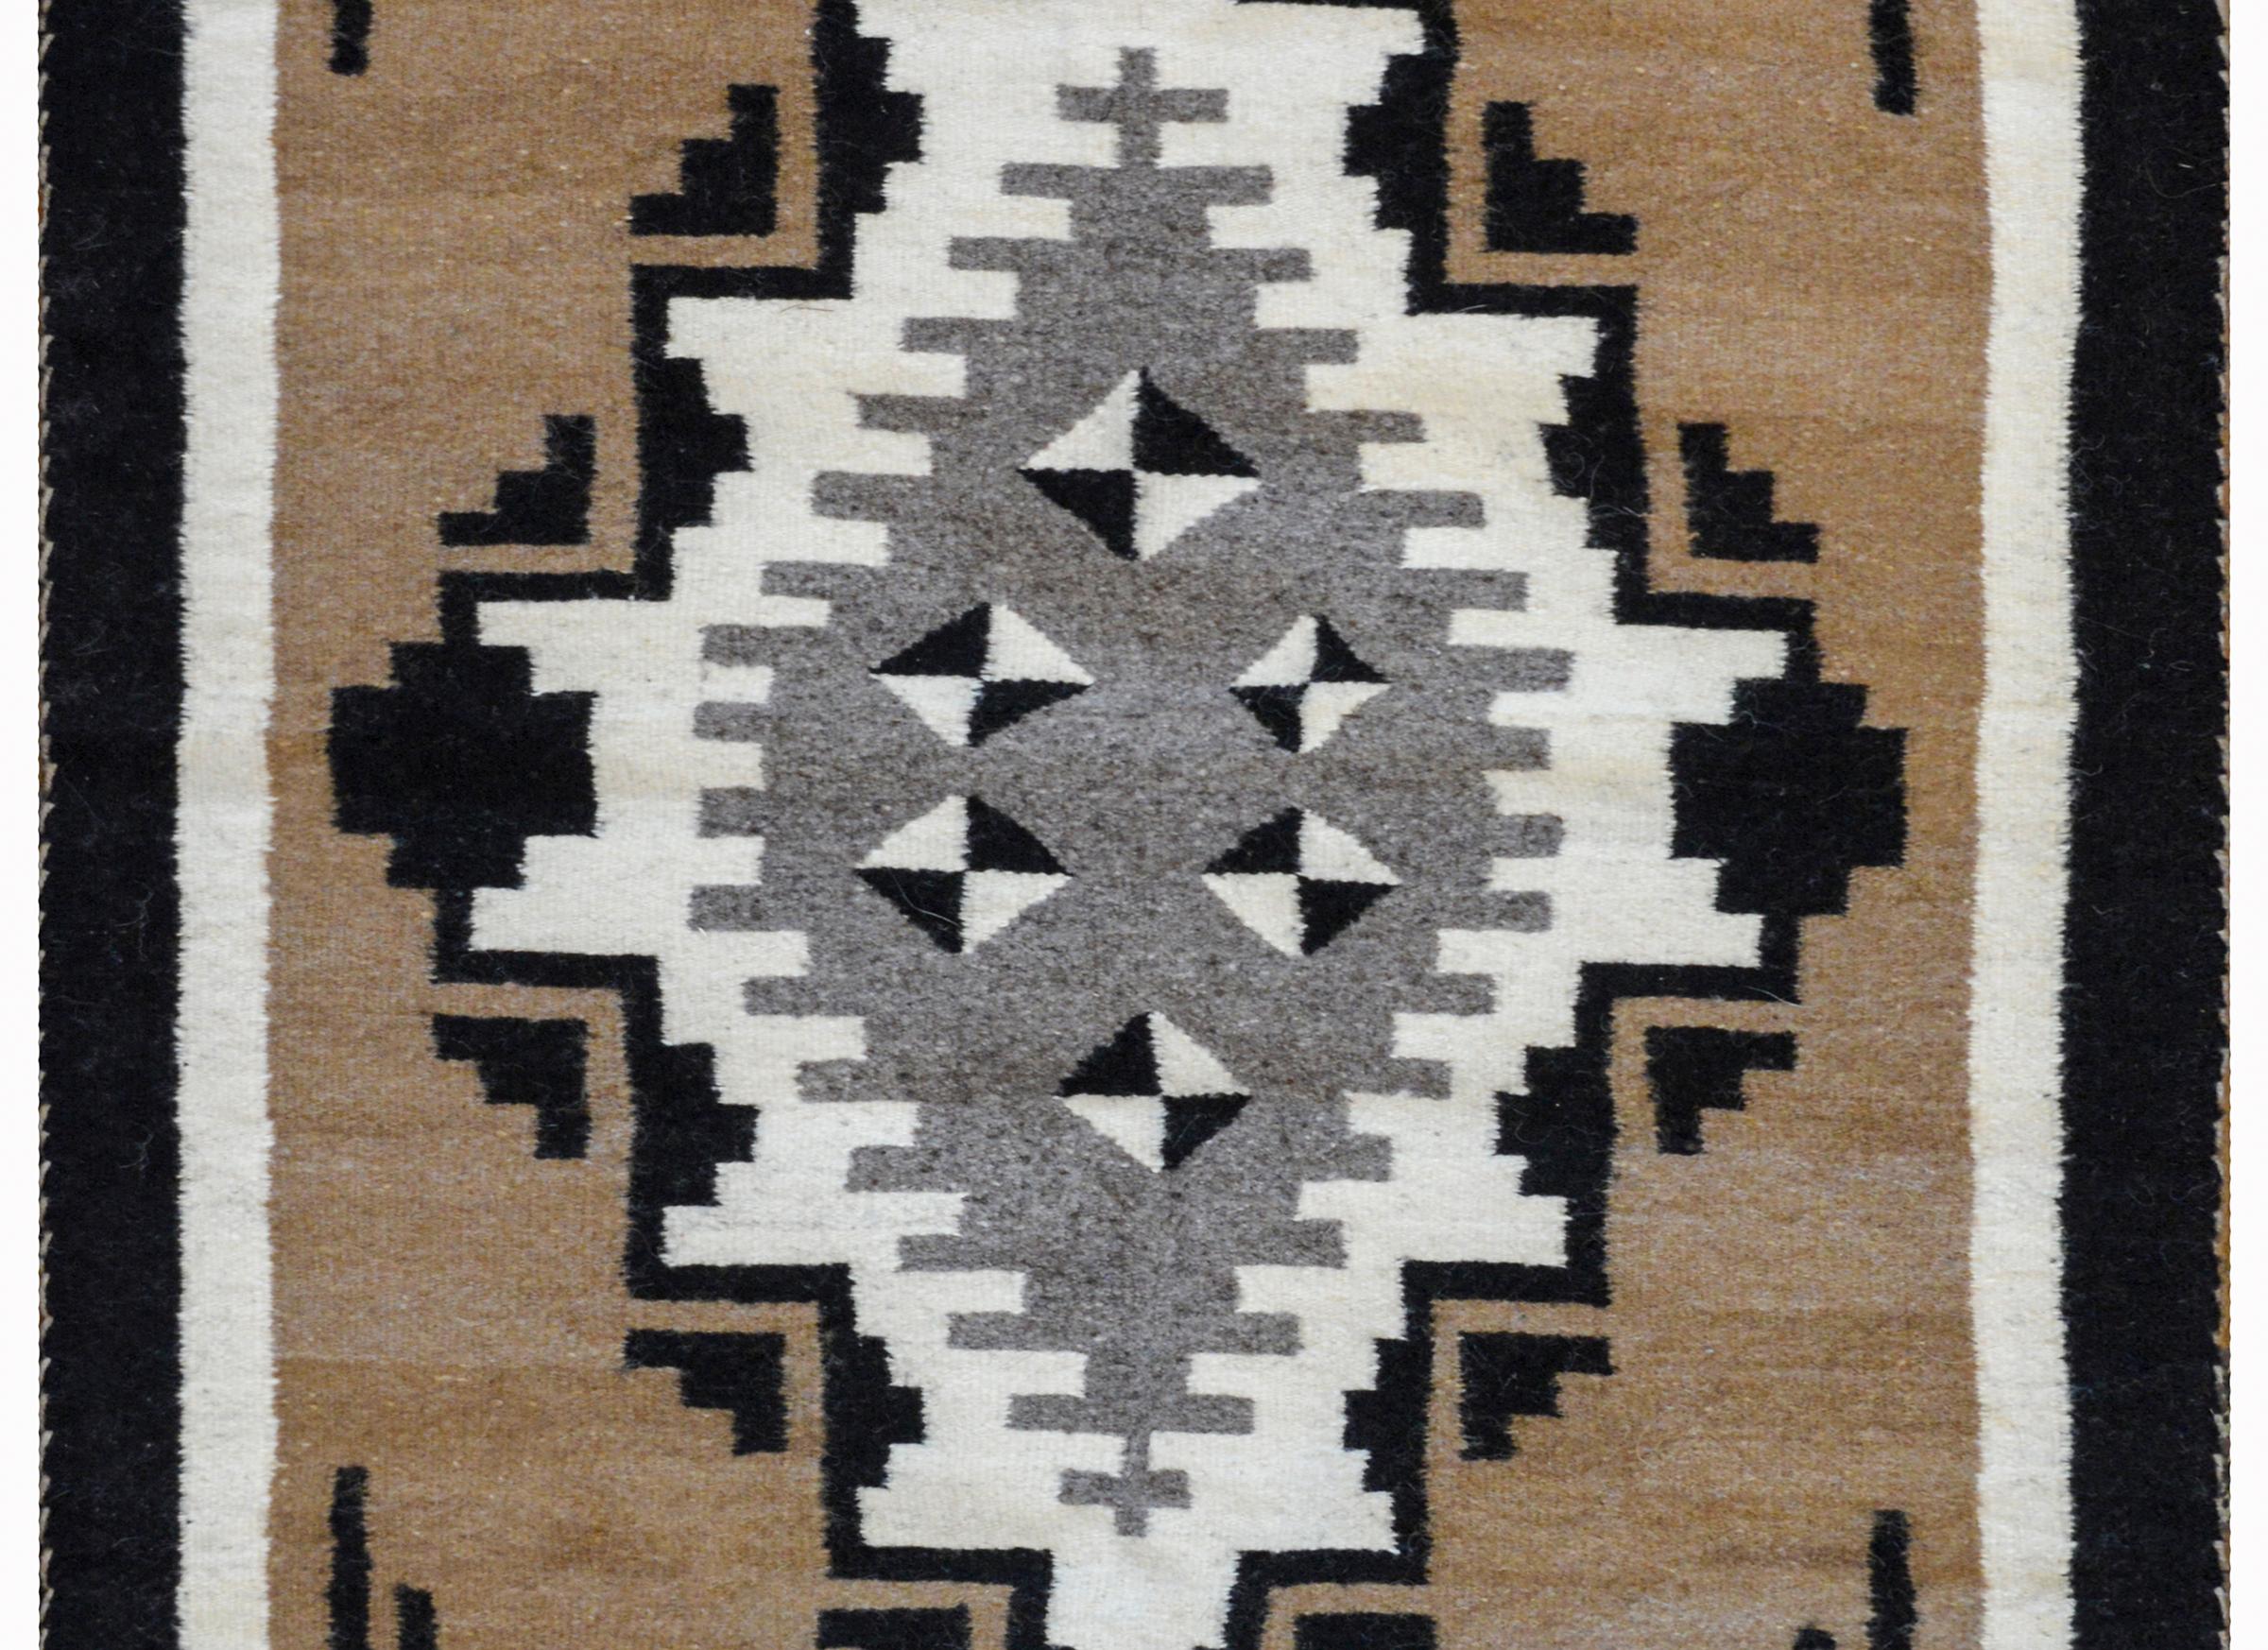 A beautiful mid-20th century Navajo rug with a large central gray diamond with multiple smaller black and white diamonds, and surrounded by geometric patterned white and black diamonds, all on a camel colored ground. The borders are simple solid